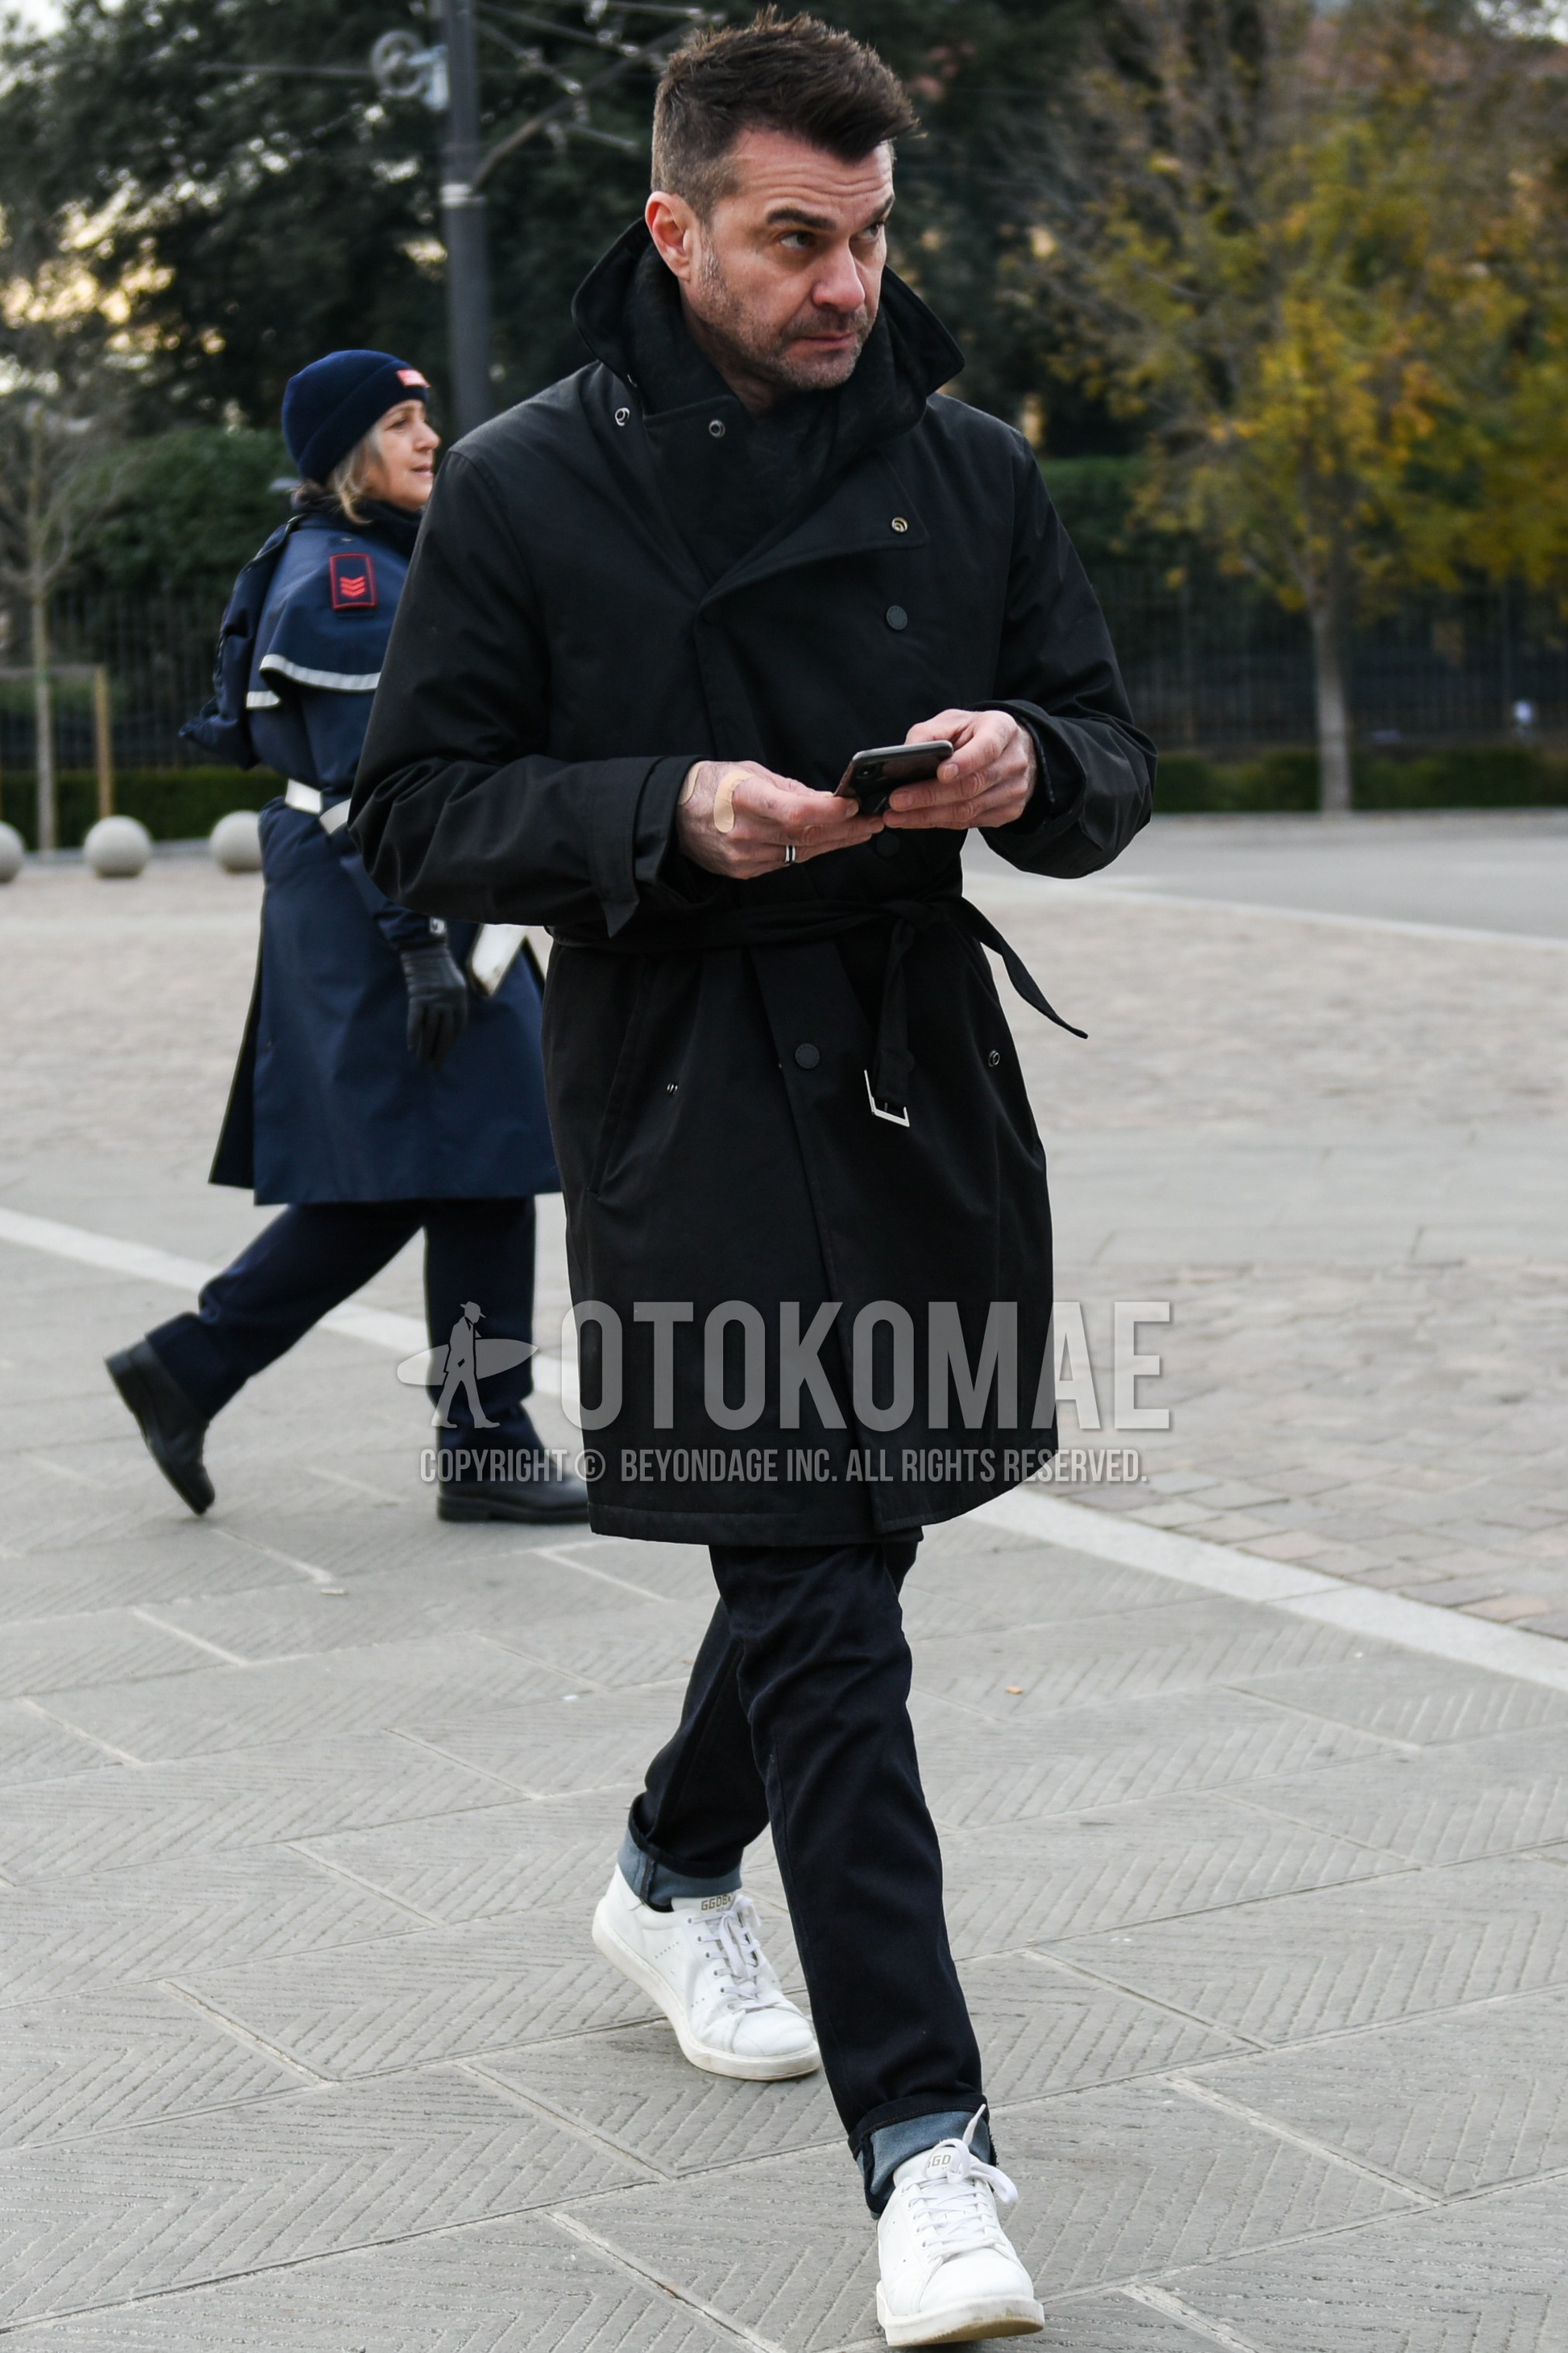 Men's autumn winter outfit with black plain scarf, black plain belted coat, black plain denim/jeans, white low-cut sneakers.